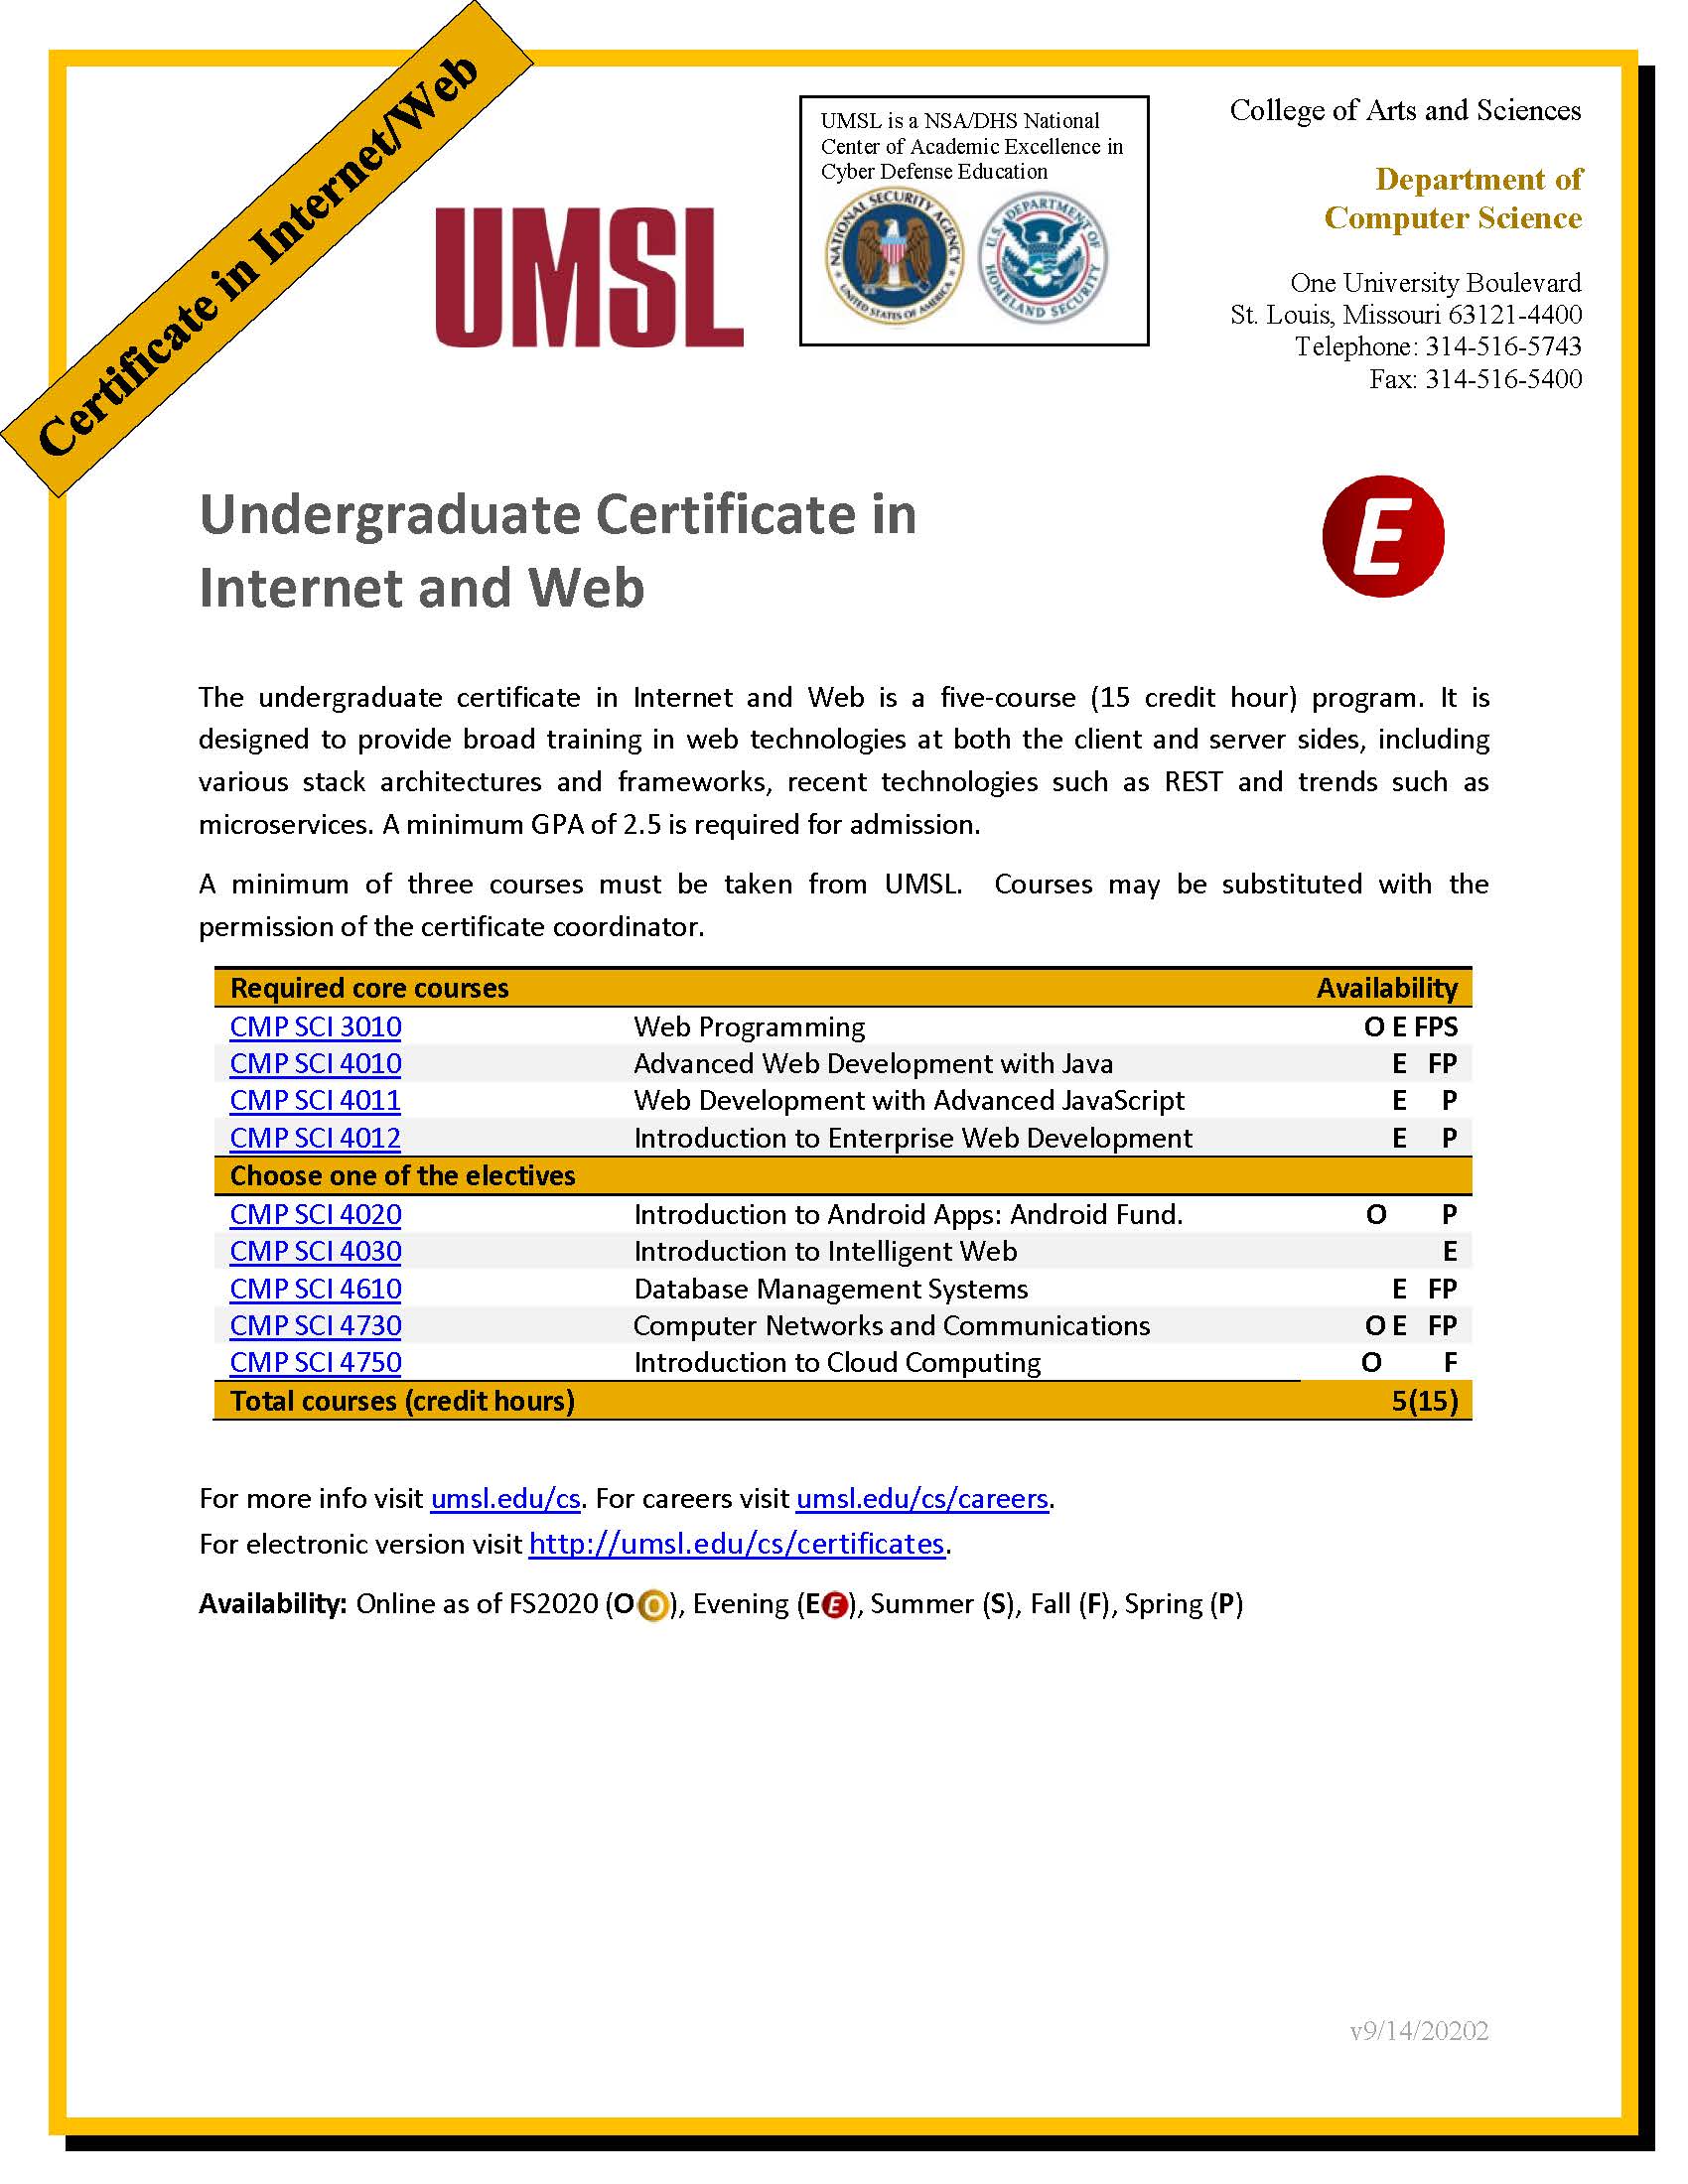 Certificate in Internet and Web UMSL